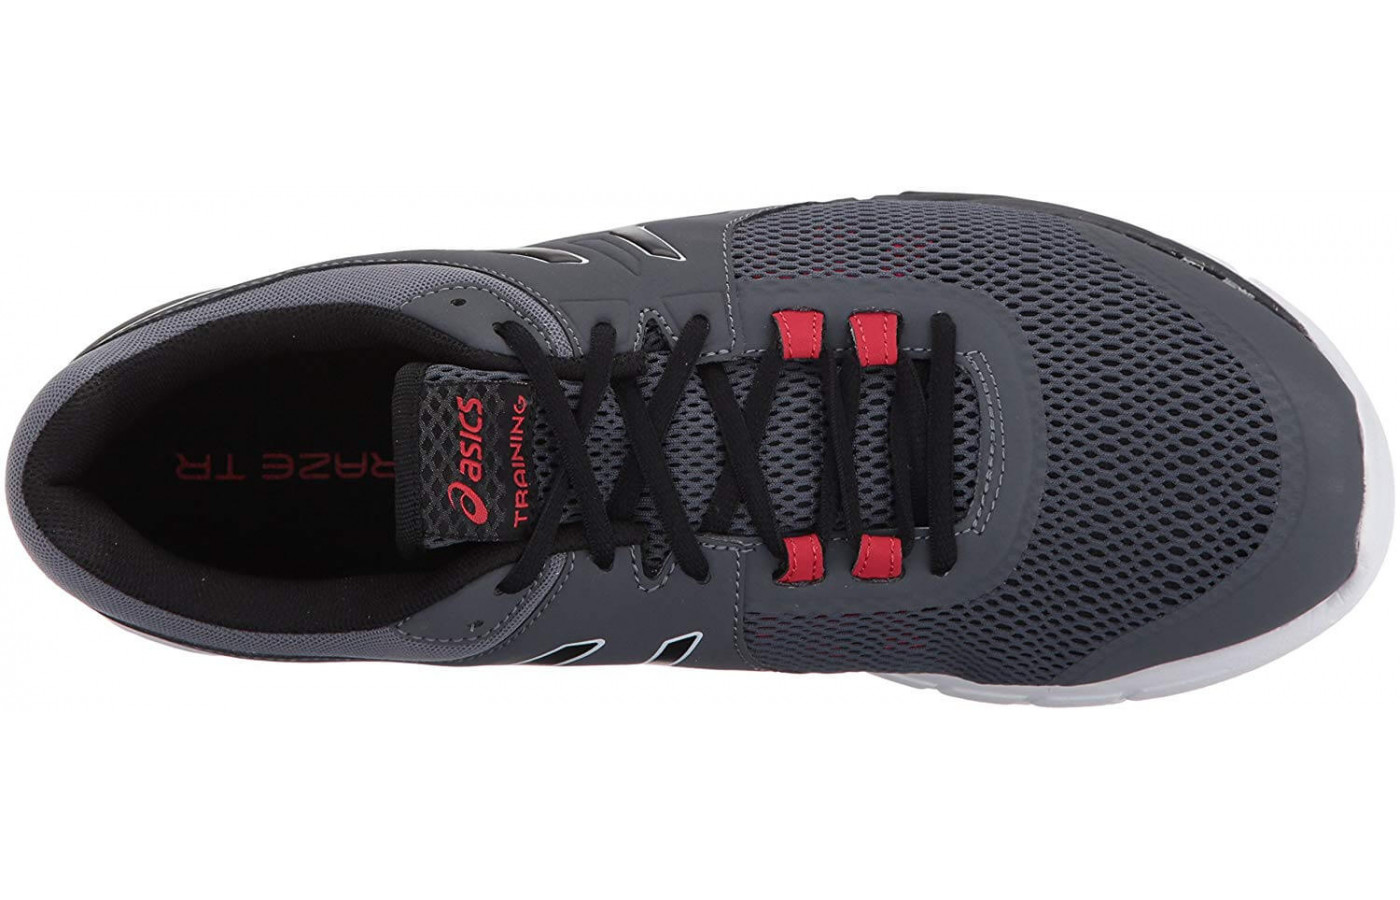 Open mesh and synthetic material give the Gel Craze TR 4 a secure yet breathable fit